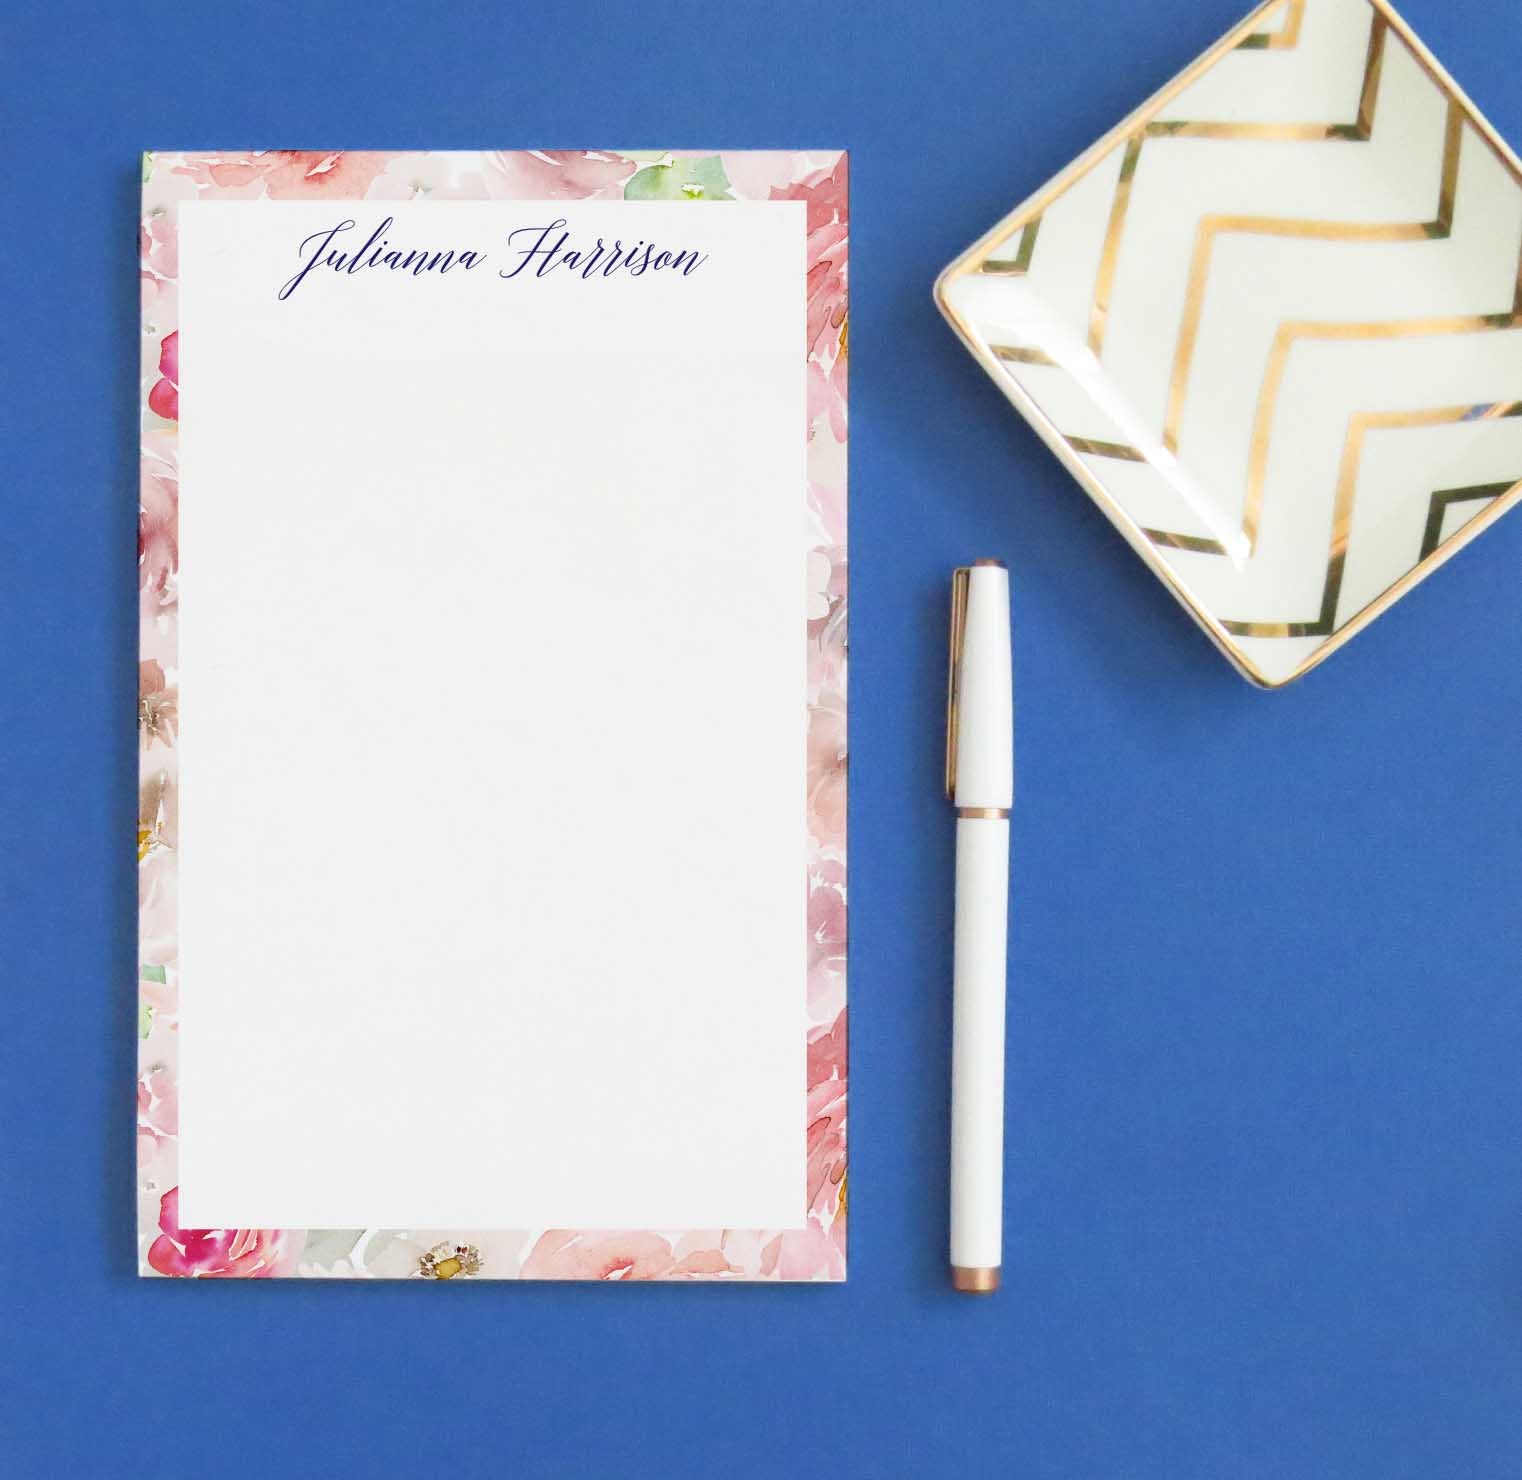 NP184 pink watercolor floral border note pad personalized set florals elegant stationery.